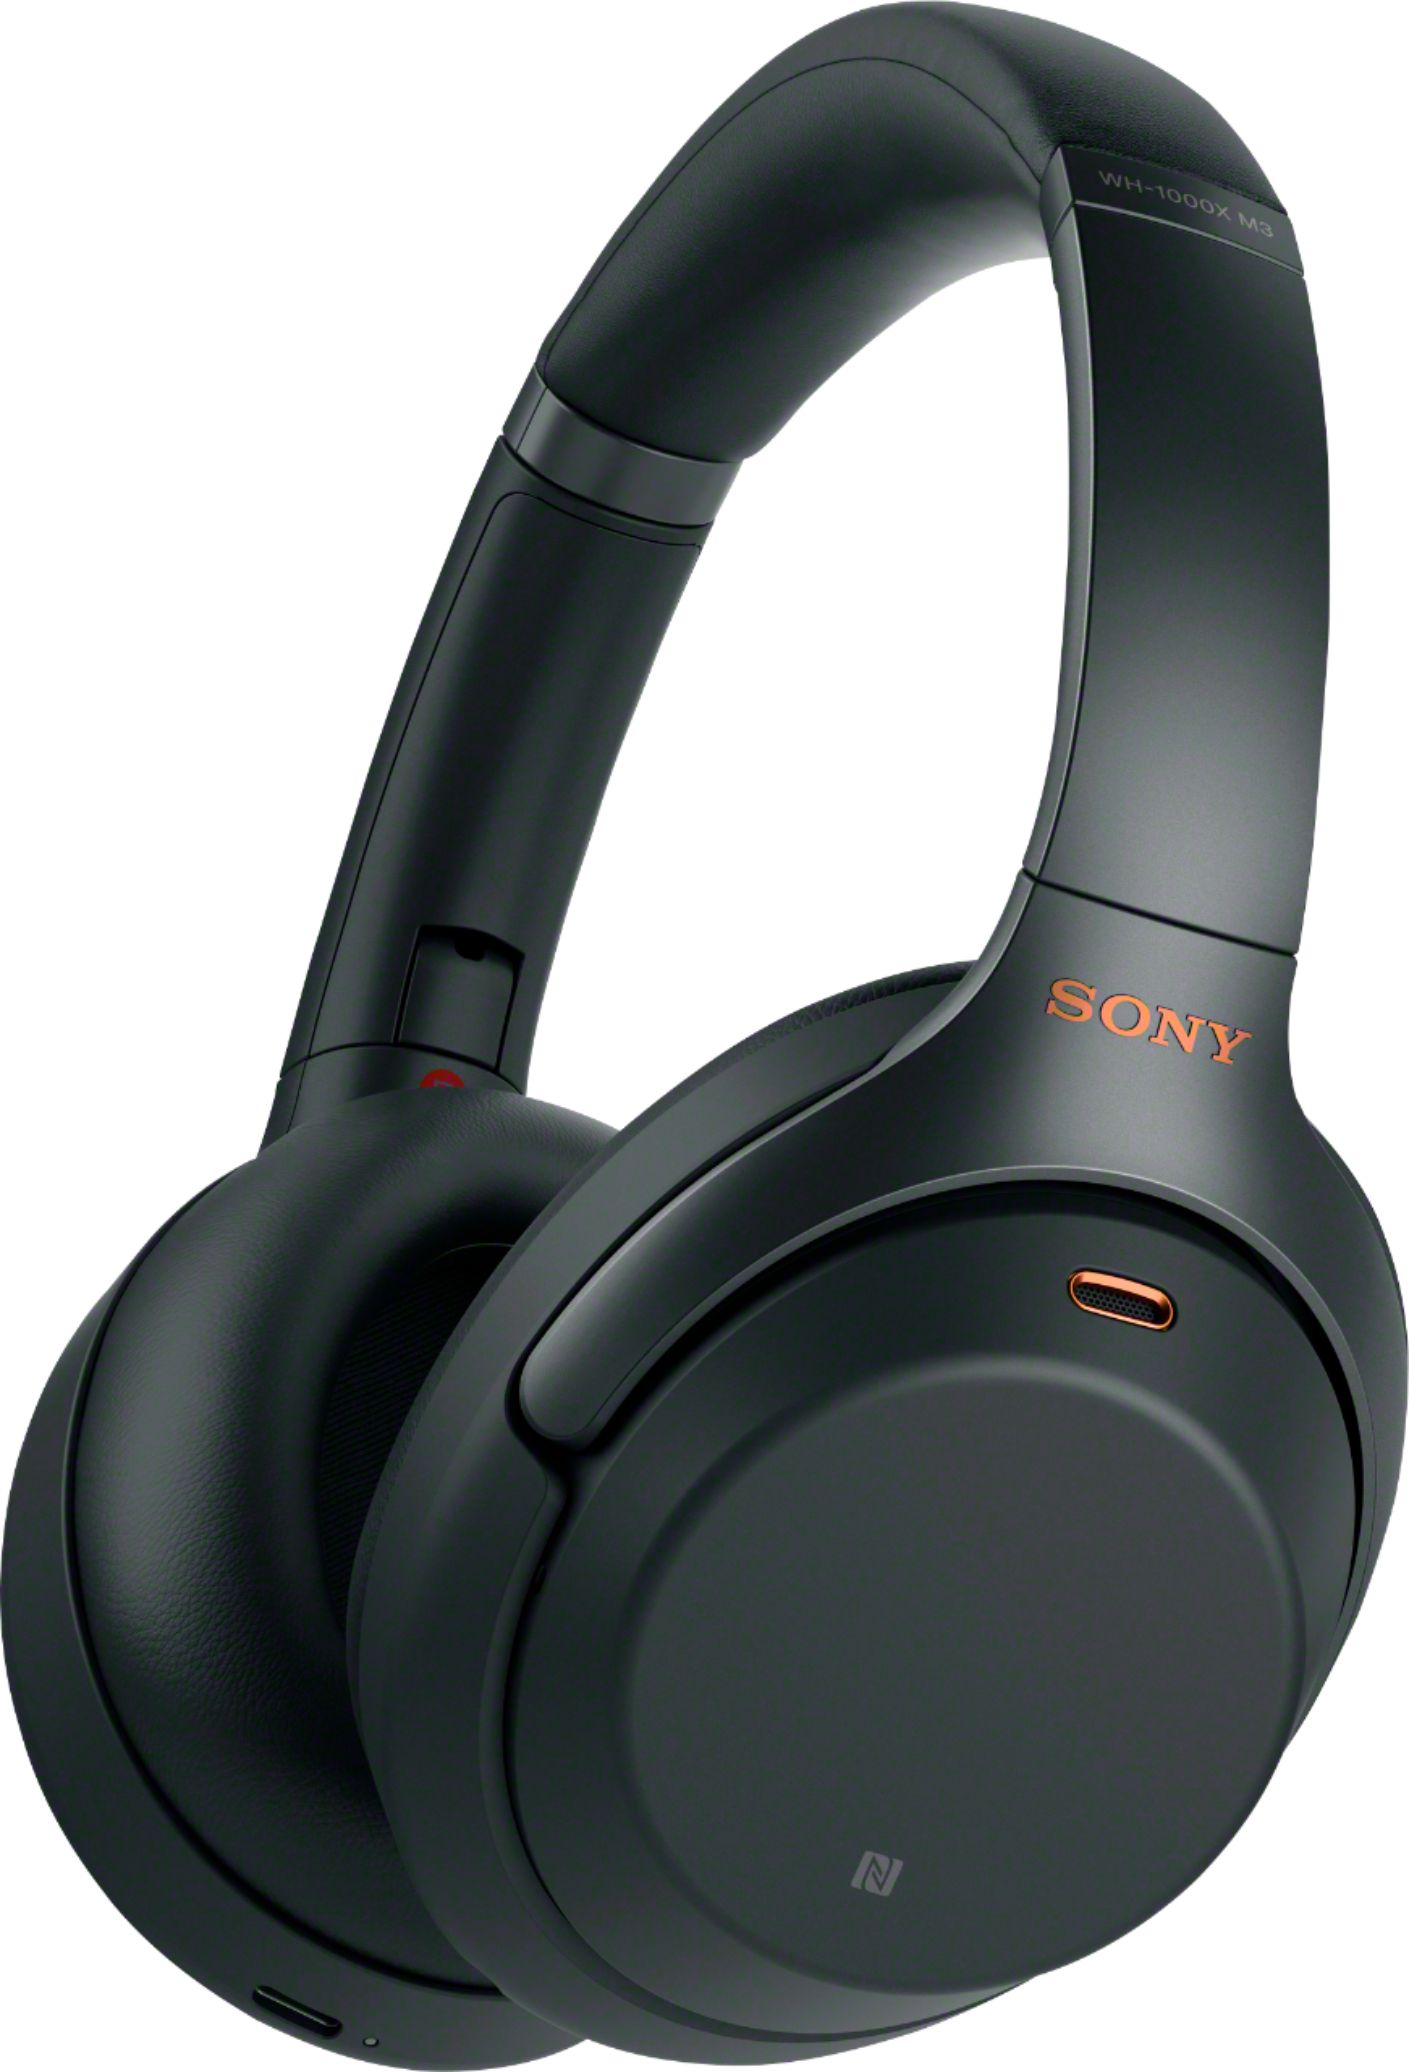 Sony - WH-1000XM3 Wireless Noise Cancelling Over-the-Ear Headphones $200 + free s/h at BEST BUY